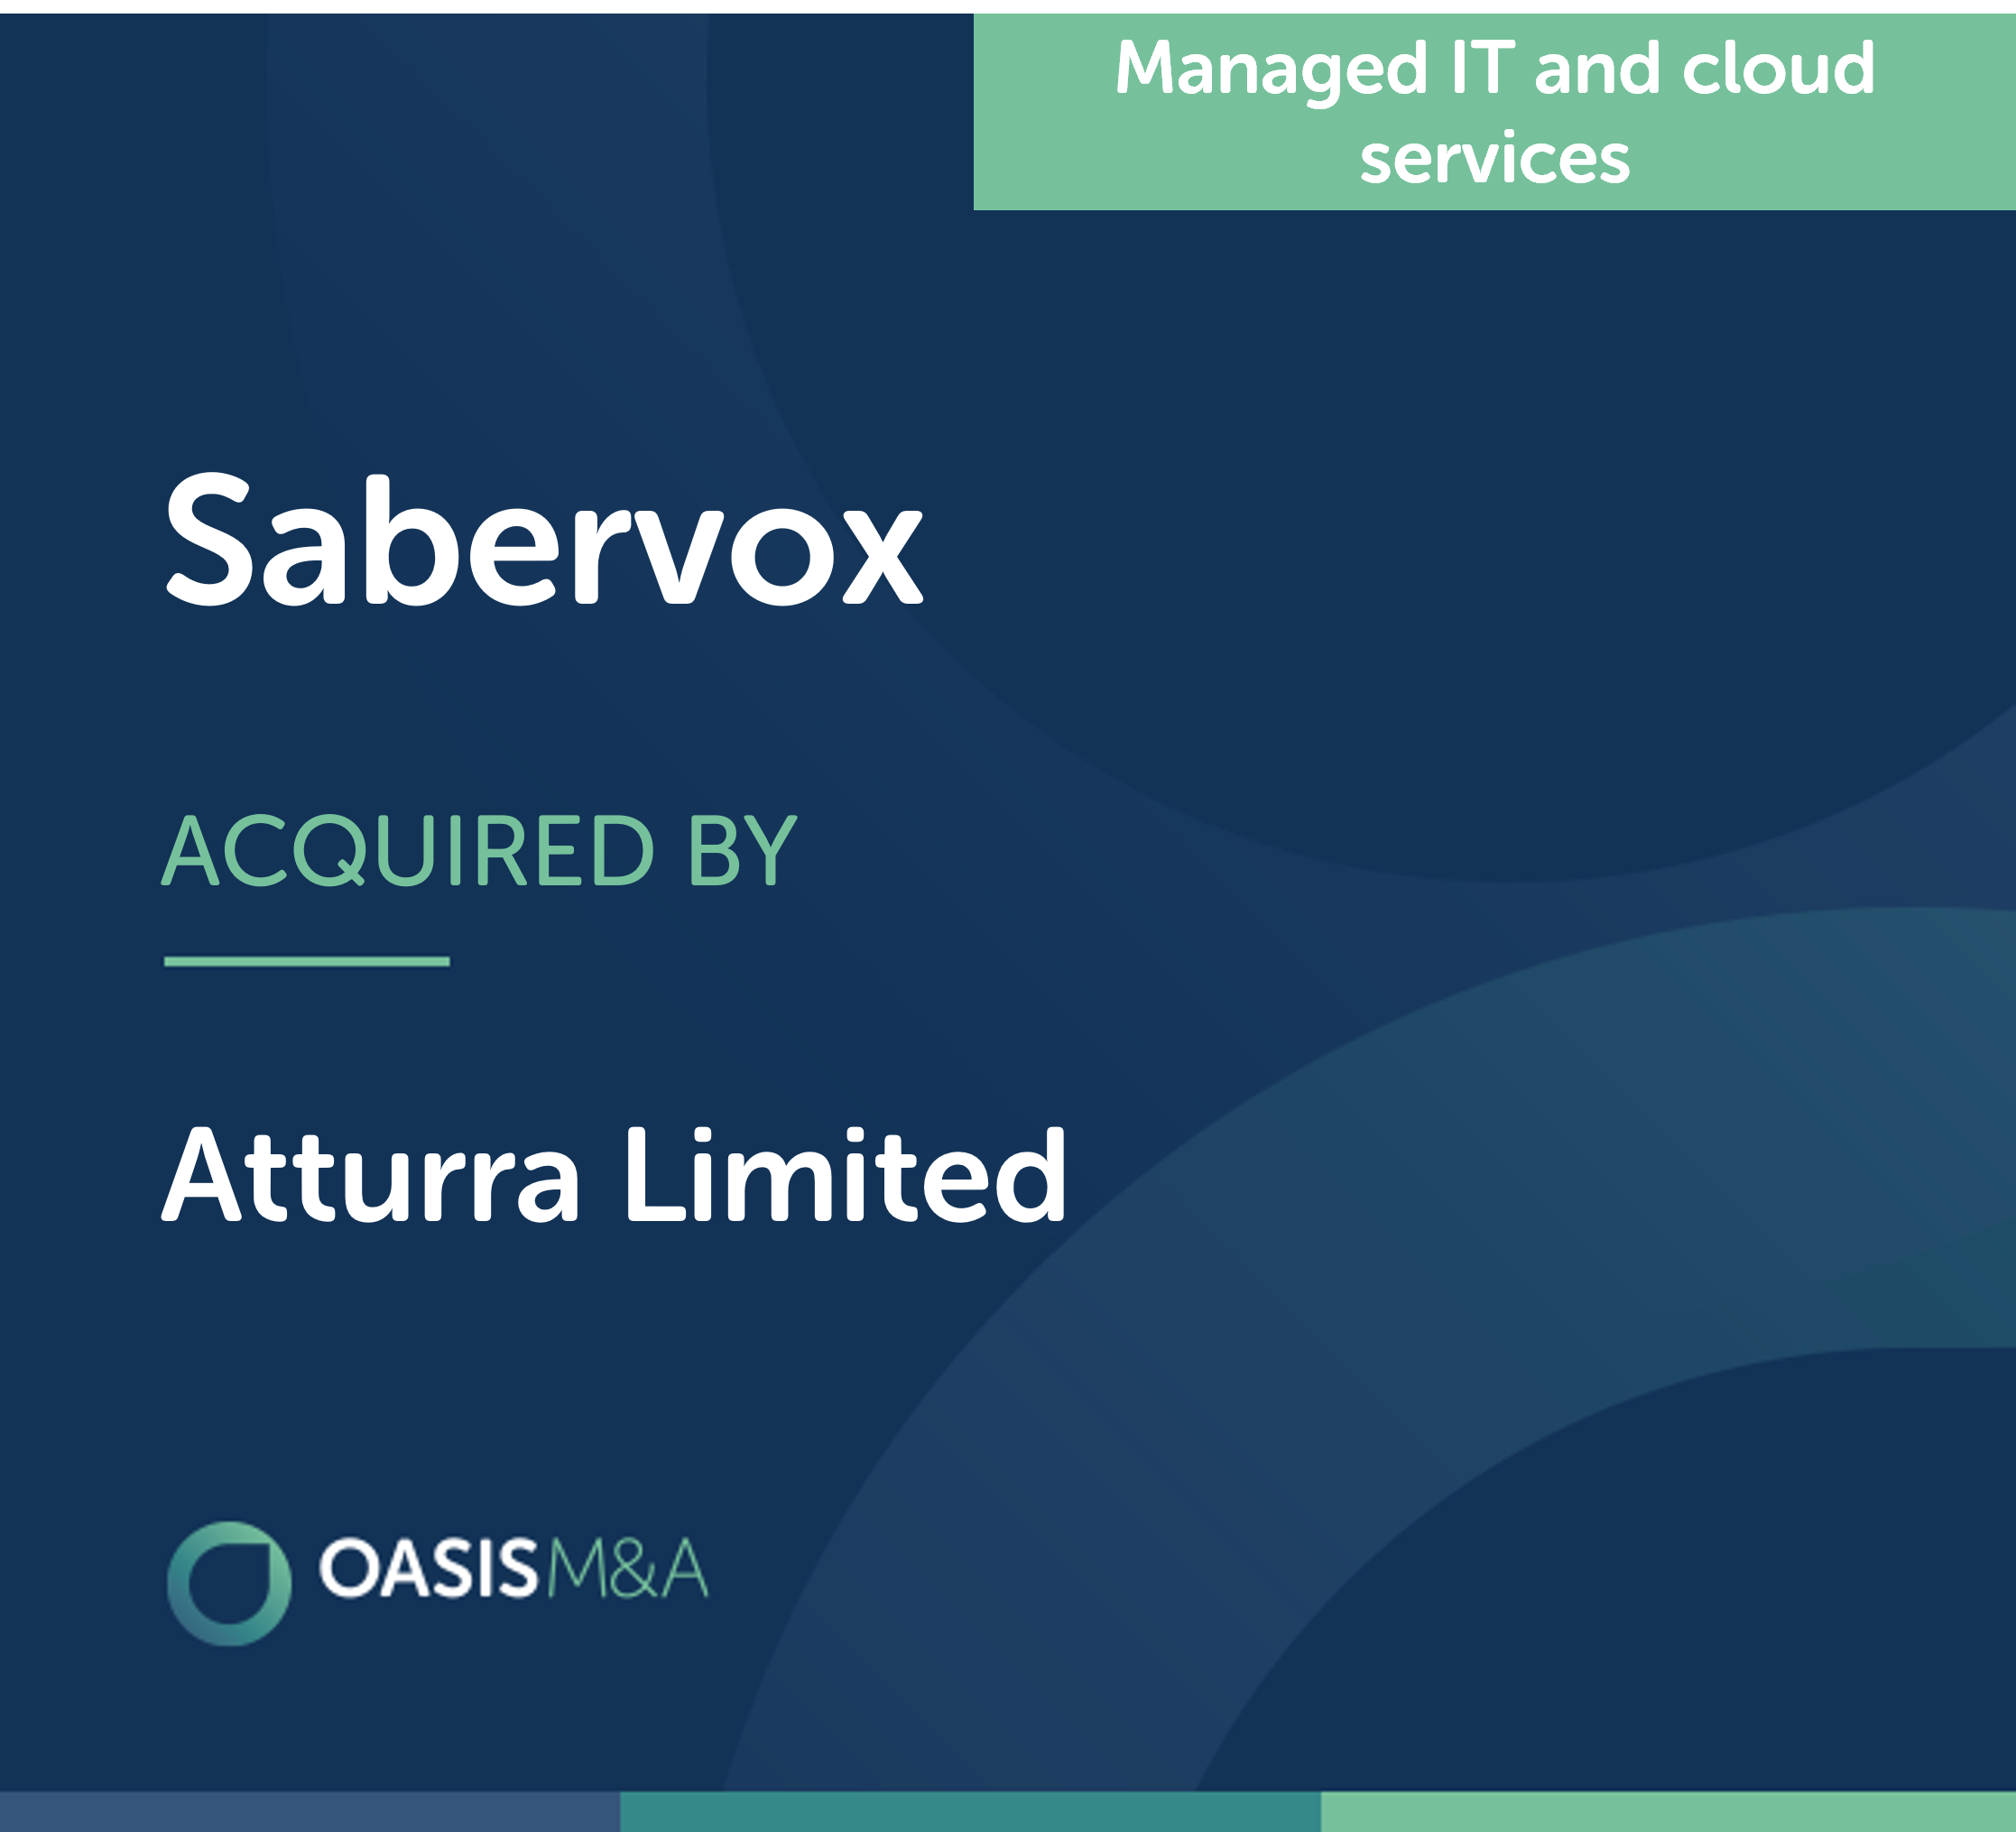 Sabervox acquired by Atturra Limited